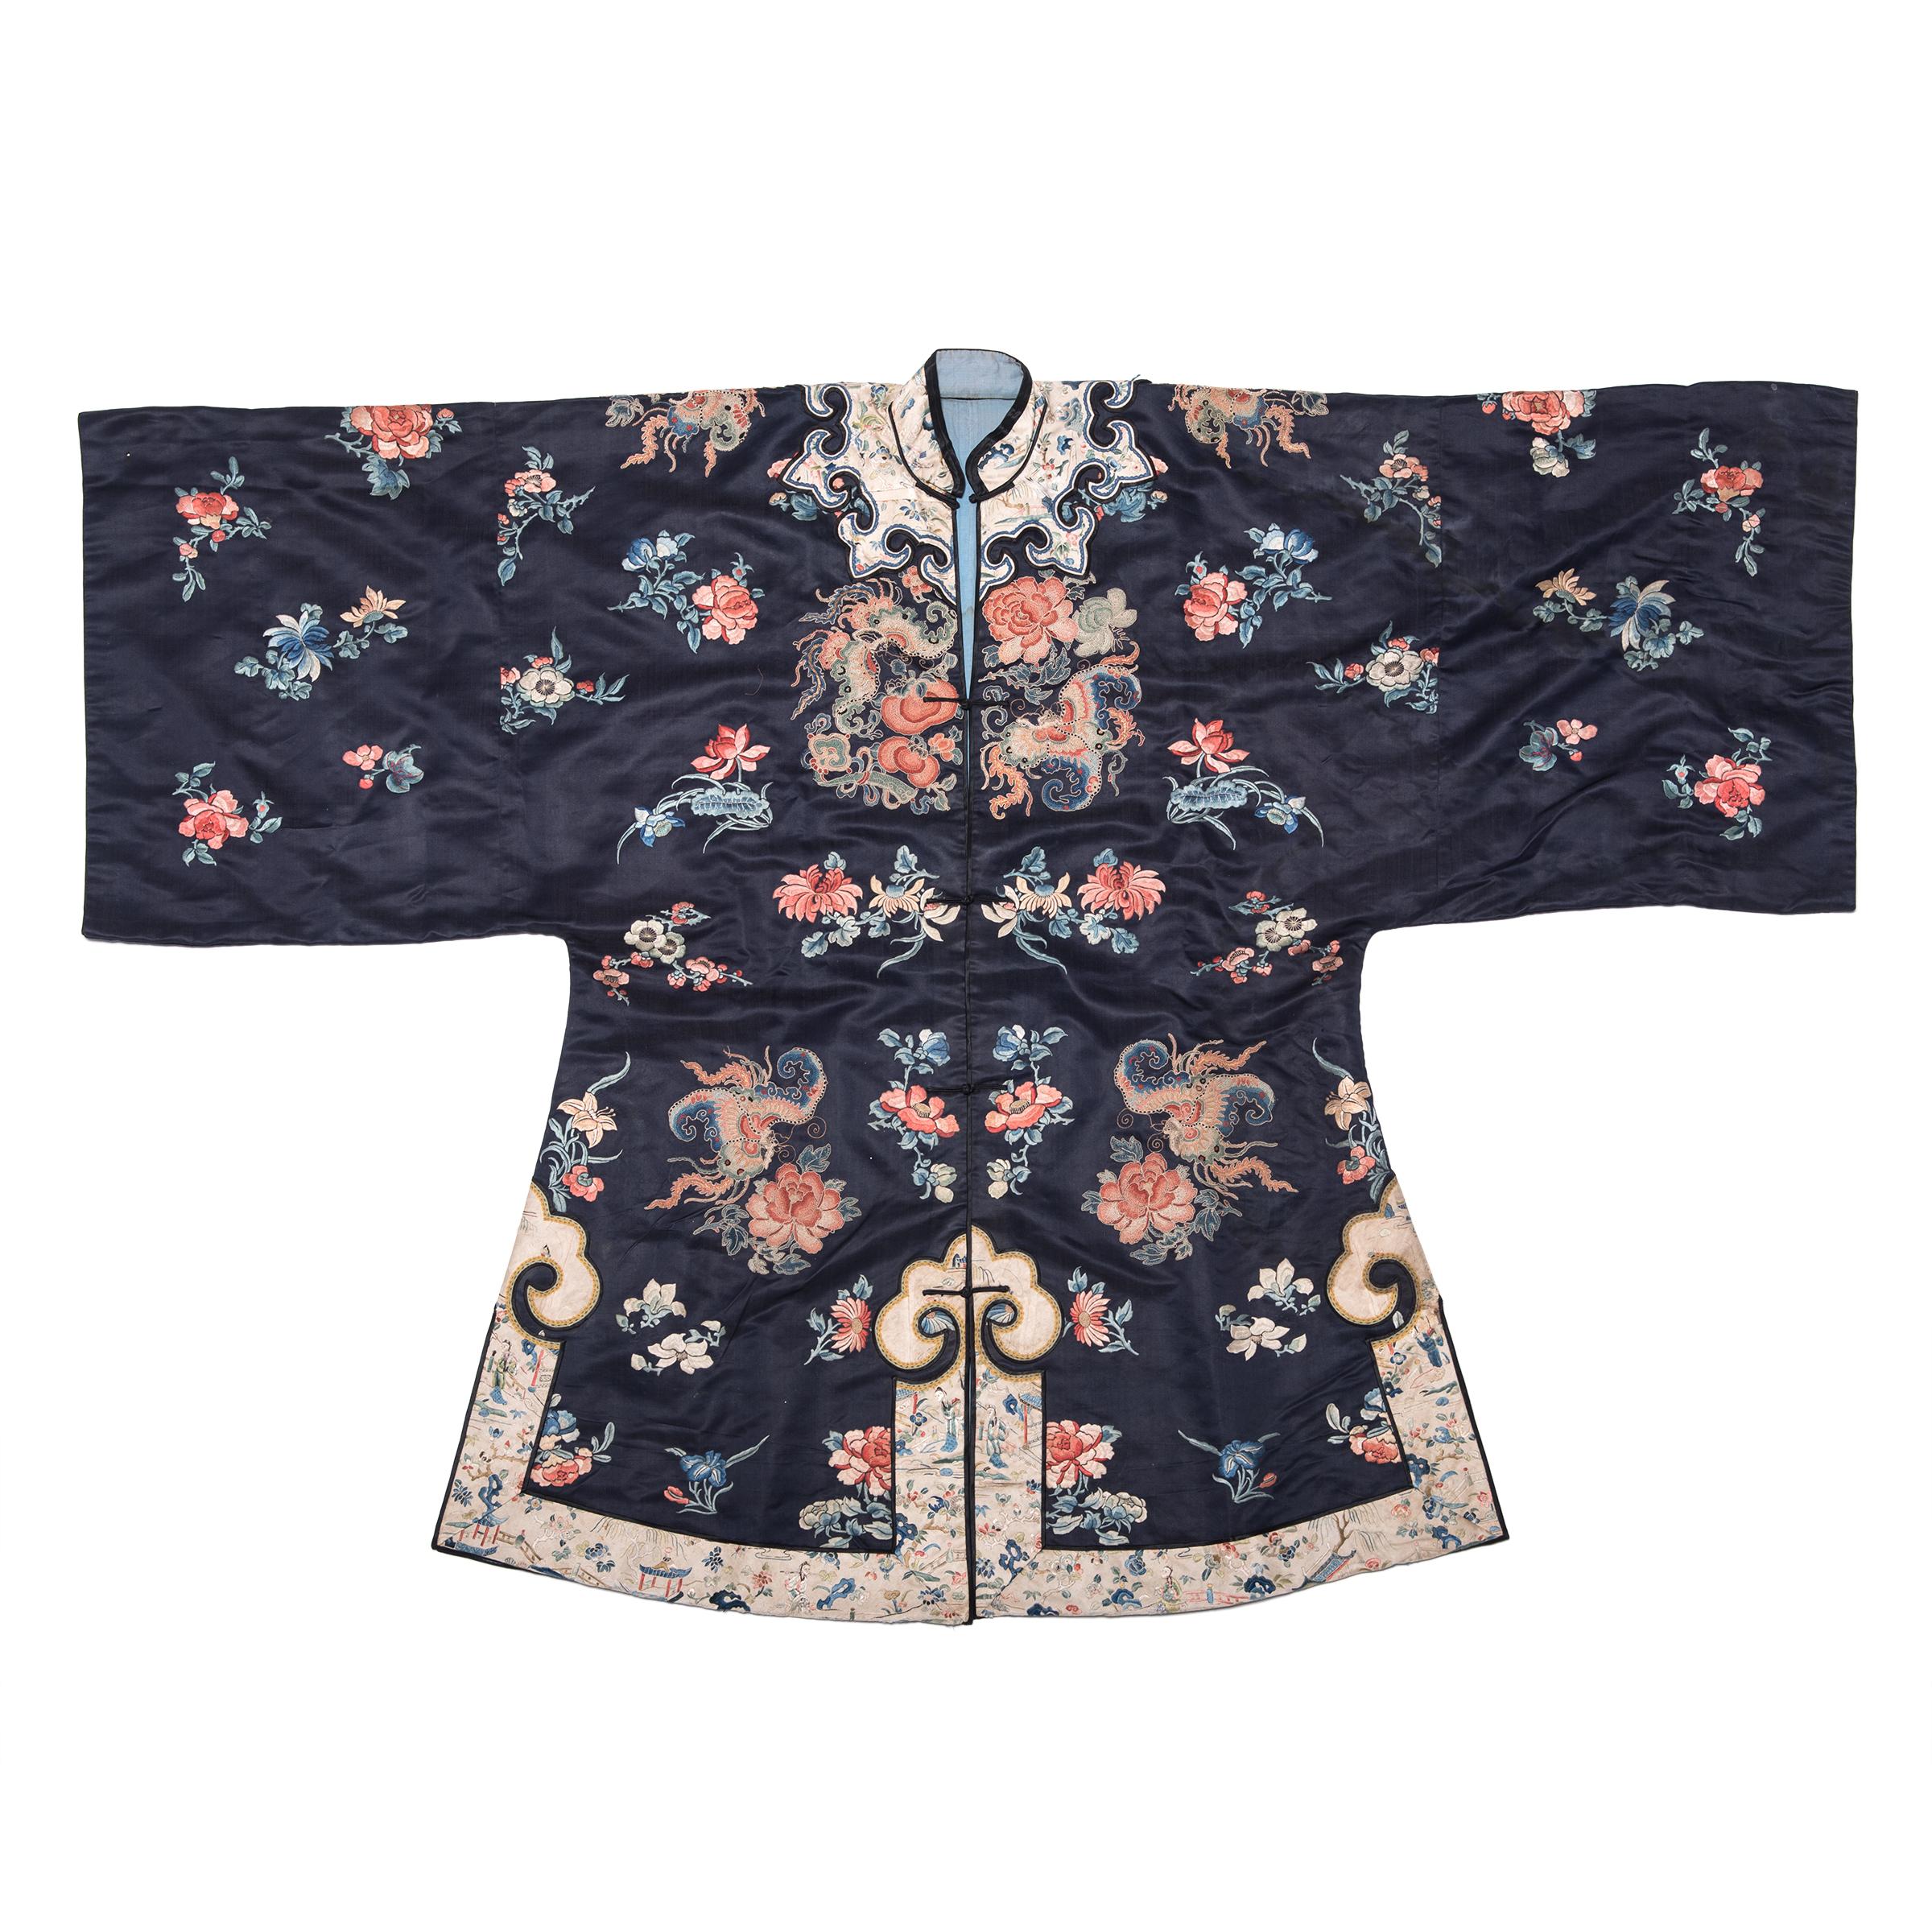 When the Qing-dynasty woman who wore this lovely jacket entered a room, people would instantly have recognized her status and rank based on the materials and decoration of her garment. So keen was the period on sartorial significance that clothing